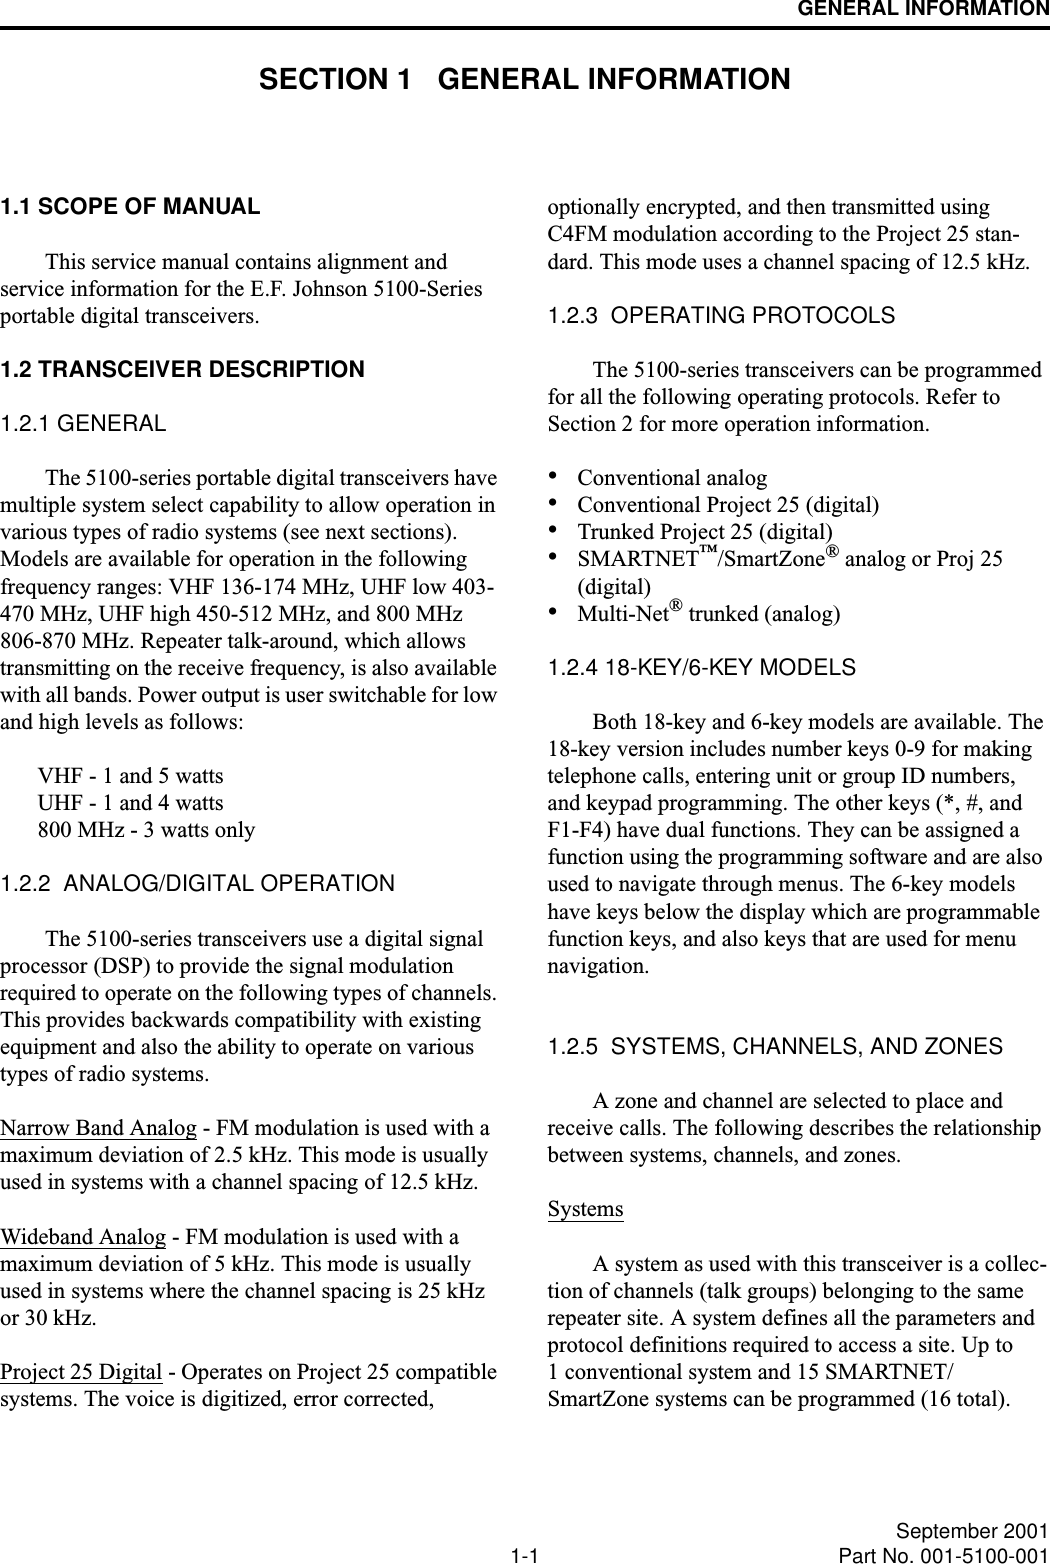 1-1 September 2001Part No. 001-5100-001GENERAL INFORMATIONSECTION 1   GENERAL INFORMATION1.1 SCOPE OF MANUALThis service manual contains alignment and service information for the E.F. Johnson 5100-Series portable digital transceivers.1.2 TRANSCEIVER DESCRIPTION1.2.1 GENERALThe 5100-series portable digital transceivers have multiple system select capability to allow operation in various types of radio systems (see next sections). Models are available for operation in the following frequency ranges: VHF 136-174 MHz, UHF low 403-470 MHz, UHF high 450-512 MHz, and 800 MHz 806-870 MHz. Repeater talk-around, which allows transmitting on the receive frequency, is also available with all bands. Power output is user switchable for low and high levels as follows: VHF - 1 and 5 wattsUHF - 1 and 4 watts800 MHz - 3 watts only1.2.2  ANALOG/DIGITAL OPERATIONThe 5100-series transceivers use a digital signal processor (DSP) to provide the signal modulation required to operate on the following types of channels. This provides backwards compatibility with existing equipment and also the ability to operate on various types of radio systems.Narrow Band Analog - FM modulation is used with a maximum deviation of 2.5 kHz. This mode is usually used in systems with a channel spacing of 12.5 kHz.Wideband Analog - FM modulation is used with a maximum deviation of 5 kHz. This mode is usually used in systems where the channel spacing is 25 kHz or 30 kHz. Project 25 Digital - Operates on Project 25 compatible systems. The voice is digitized, error corrected, optionally encrypted, and then transmitted using C4FM modulation according to the Project 25 stan-dard. This mode uses a channel spacing of 12.5 kHz.1.2.3  OPERATING PROTOCOLSThe 5100-series transceivers can be programmed for all the following operating protocols. Refer to Section 2 for more operation information.•Conventional analog•Conventional Project 25 (digital)•Trunked Project 25 (digital)•SMARTNET™/SmartZone® analog or Proj 25 (digital)•Multi-Net® trunked (analog)1.2.4 18-KEY/6-KEY MODELSBoth 18-key and 6-key models are available. The 18-key version includes number keys 0-9 for making telephone calls, entering unit or group ID numbers, and keypad programming. The other keys (*, #, and F1-F4) have dual functions. They can be assigned a function using the programming software and are also used to navigate through menus. The 6-key models have keys below the display which are programmable function keys, and also keys that are used for menu navigation.1.2.5  SYSTEMS, CHANNELS, AND ZONESA zone and channel are selected to place and receive calls. The following describes the relationship between systems, channels, and zones.SystemsA system as used with this transceiver is a collec-tion of channels (talk groups) belonging to the same repeater site. A system defines all the parameters and protocol definitions required to access a site. Up to 1 conventional system and 15 SMARTNET/SmartZone systems can be programmed (16 total). 